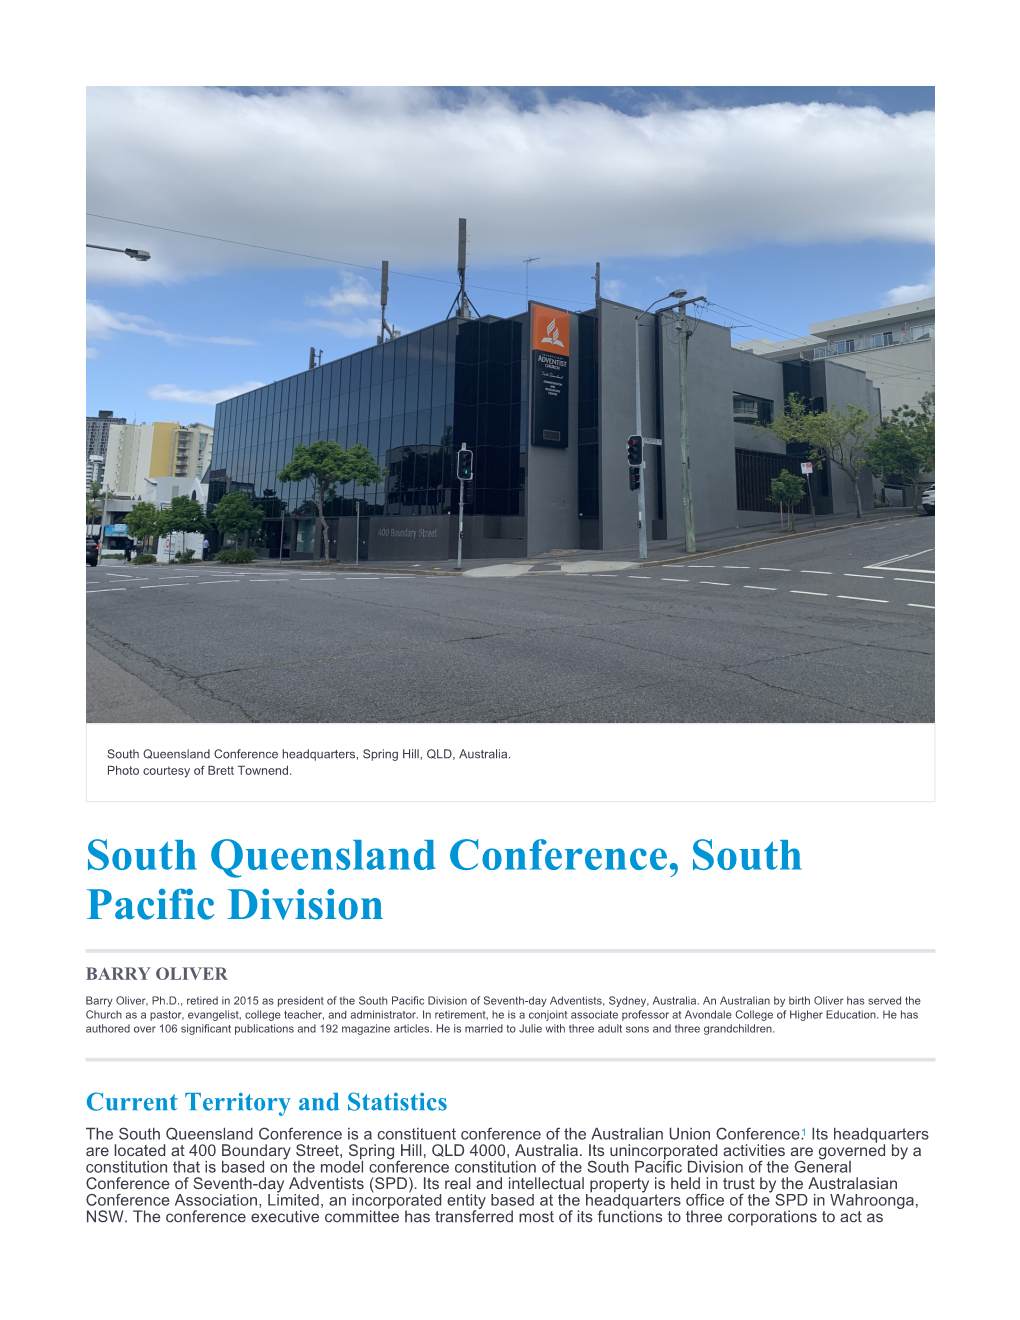 South Queensland Conference, South Pacific Division